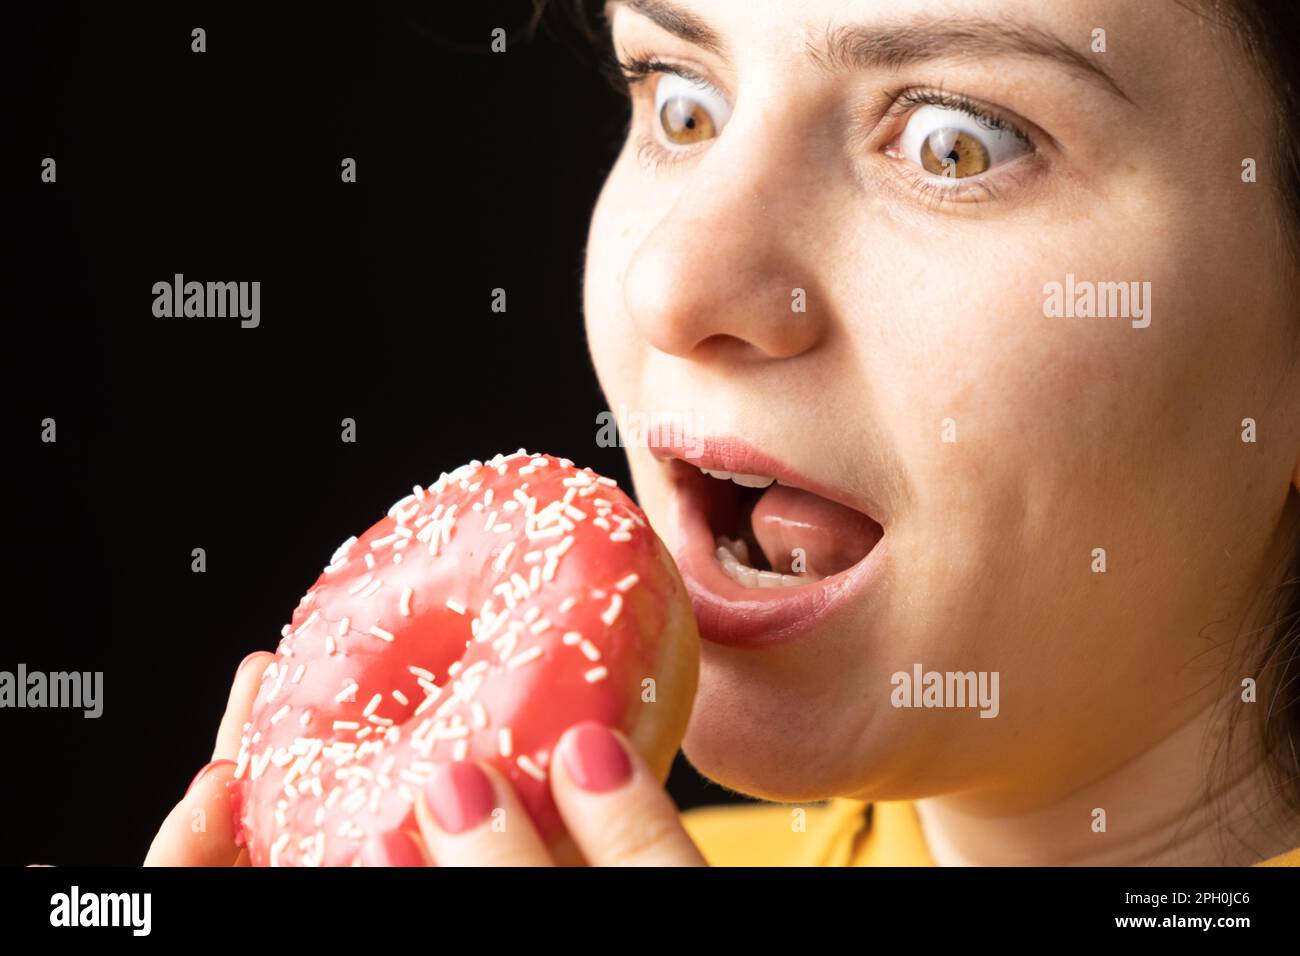 A woman bites a large red donut, a black background, a place for text. Gluttony, overeating and sugar addict Stock Photo